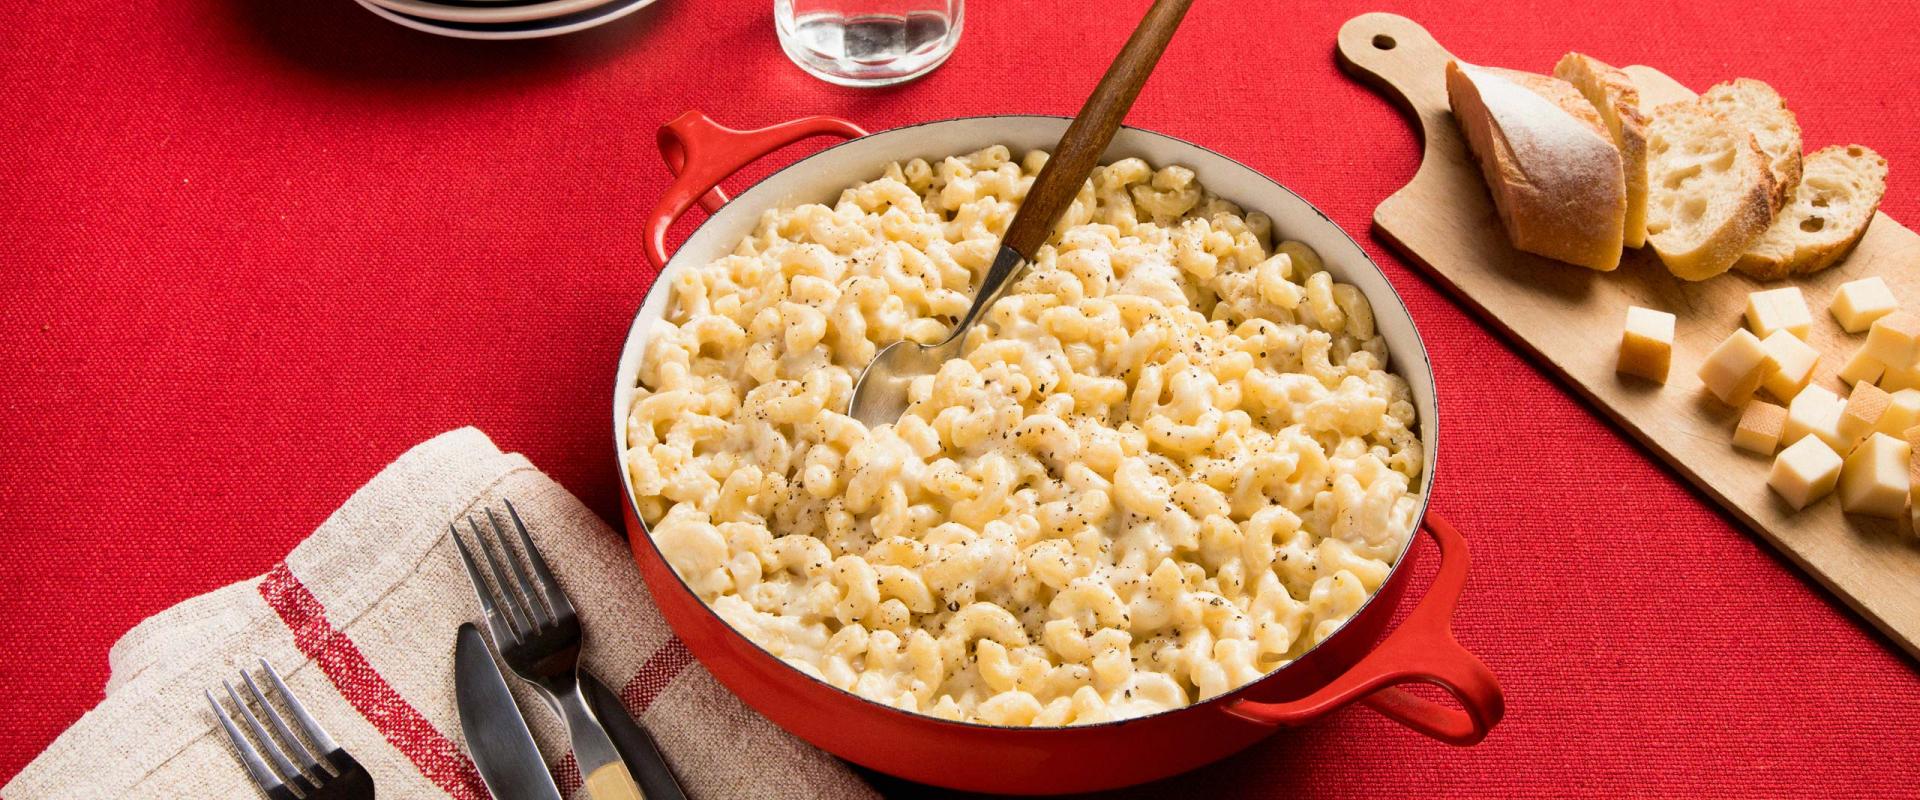 One-pot mac and cheese with OKA and Gouda